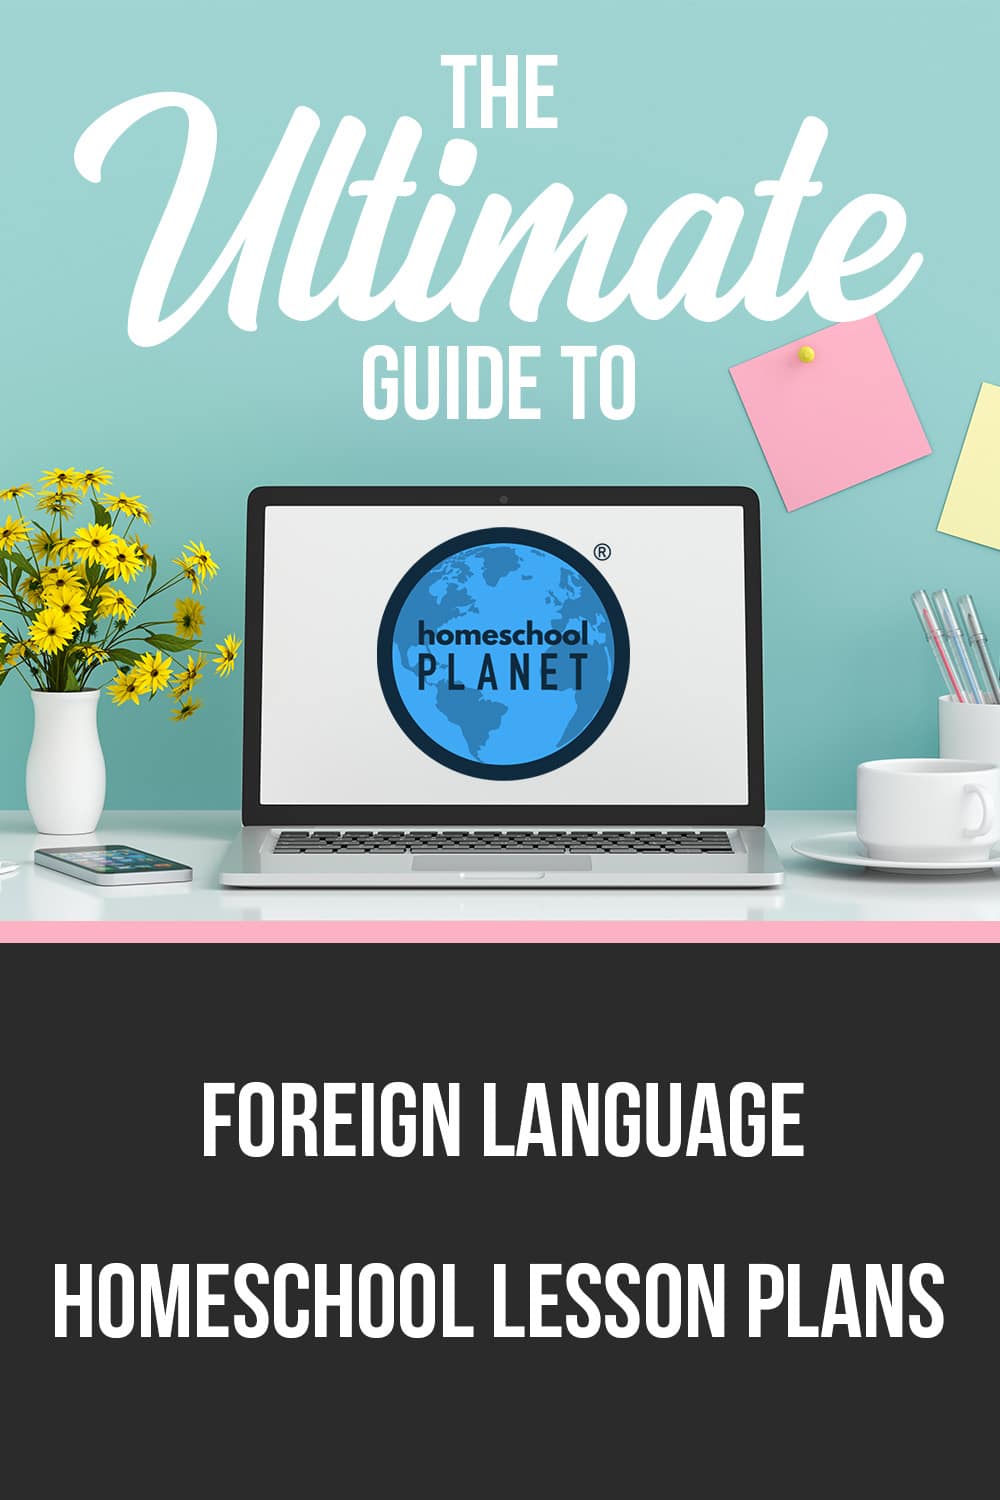 Foreign Language study in your homeschool